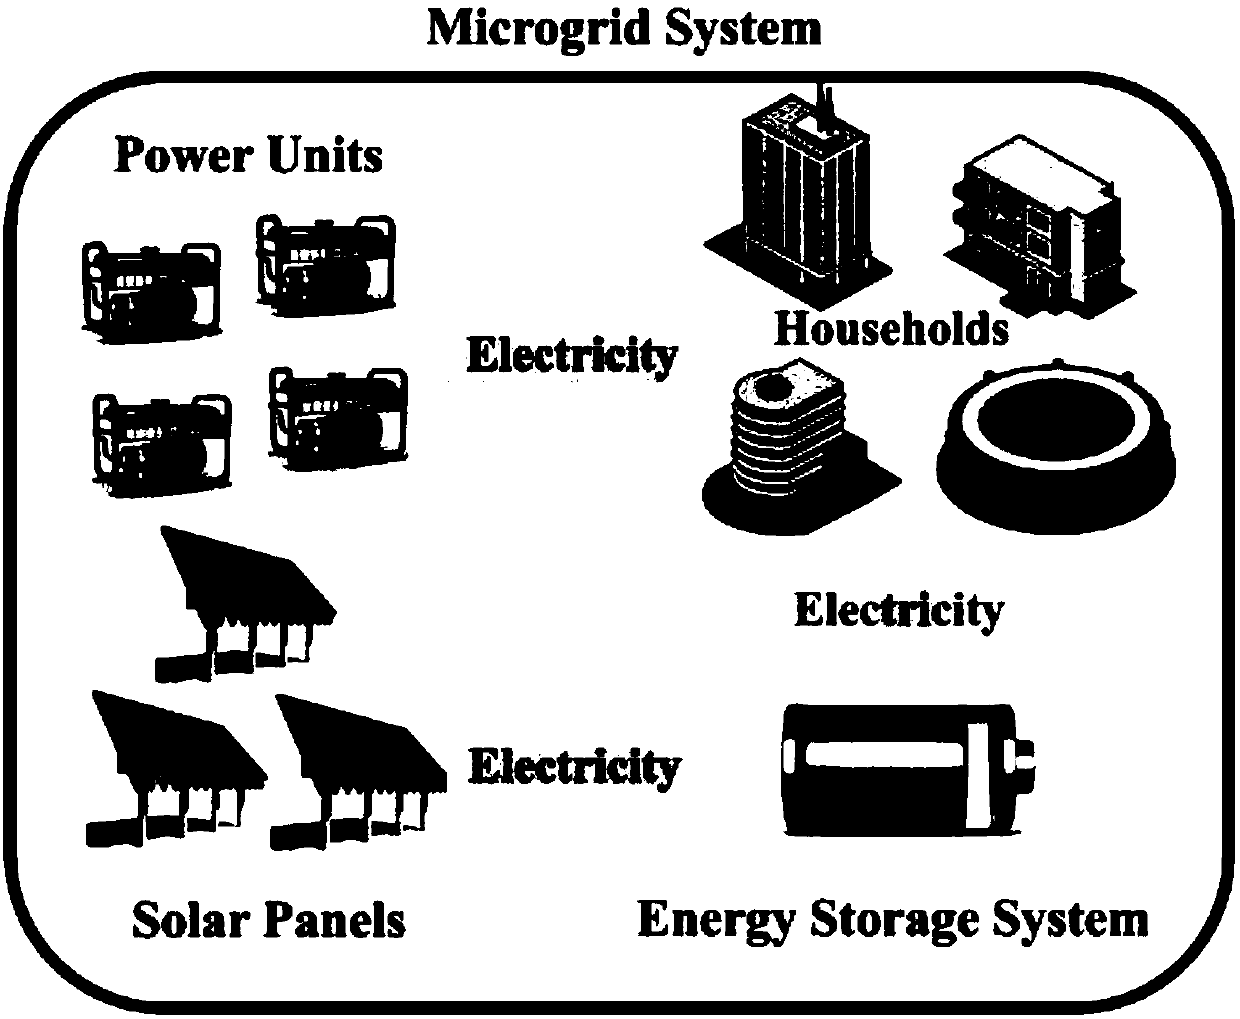 Power generation scheduling technology involving time-related renewable energy in microgrid